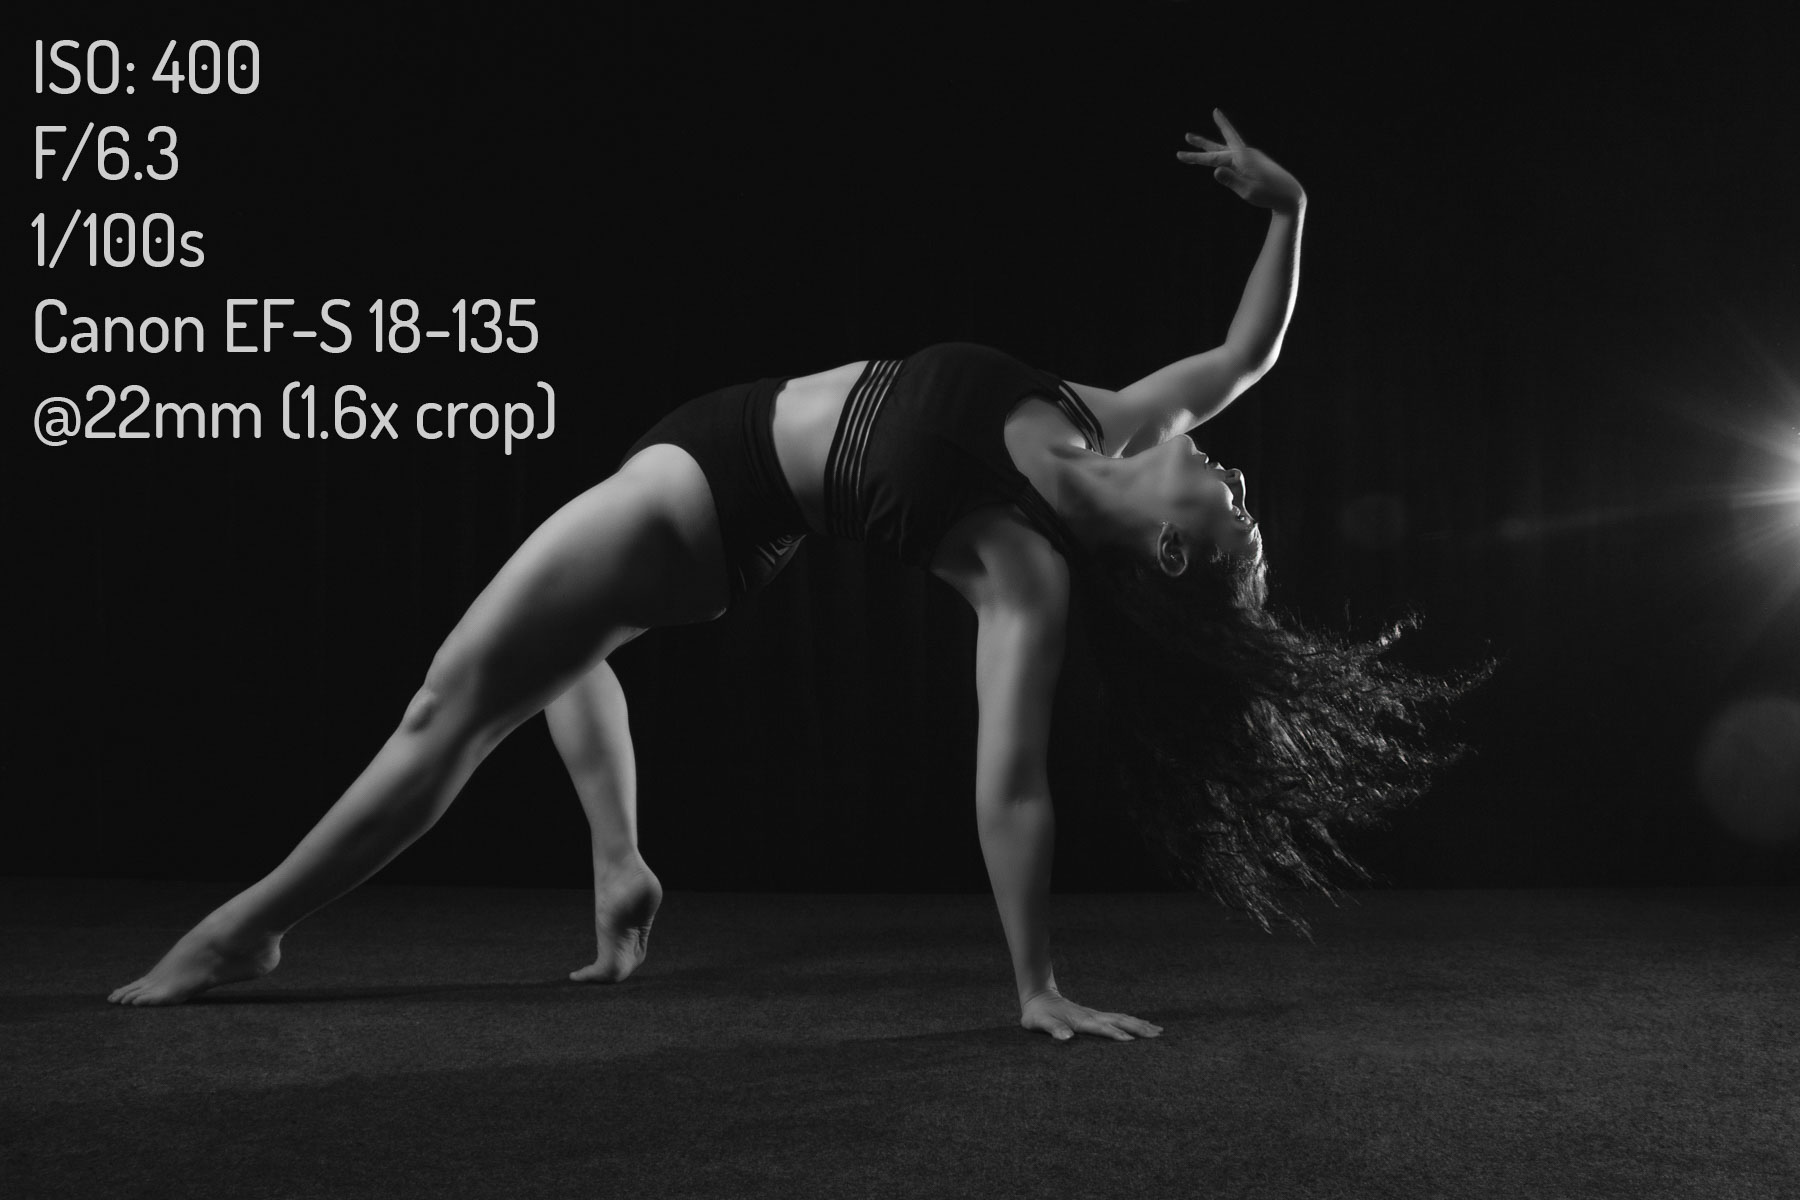 Black and white image of contemporary dancer Jessica with camera and settings information